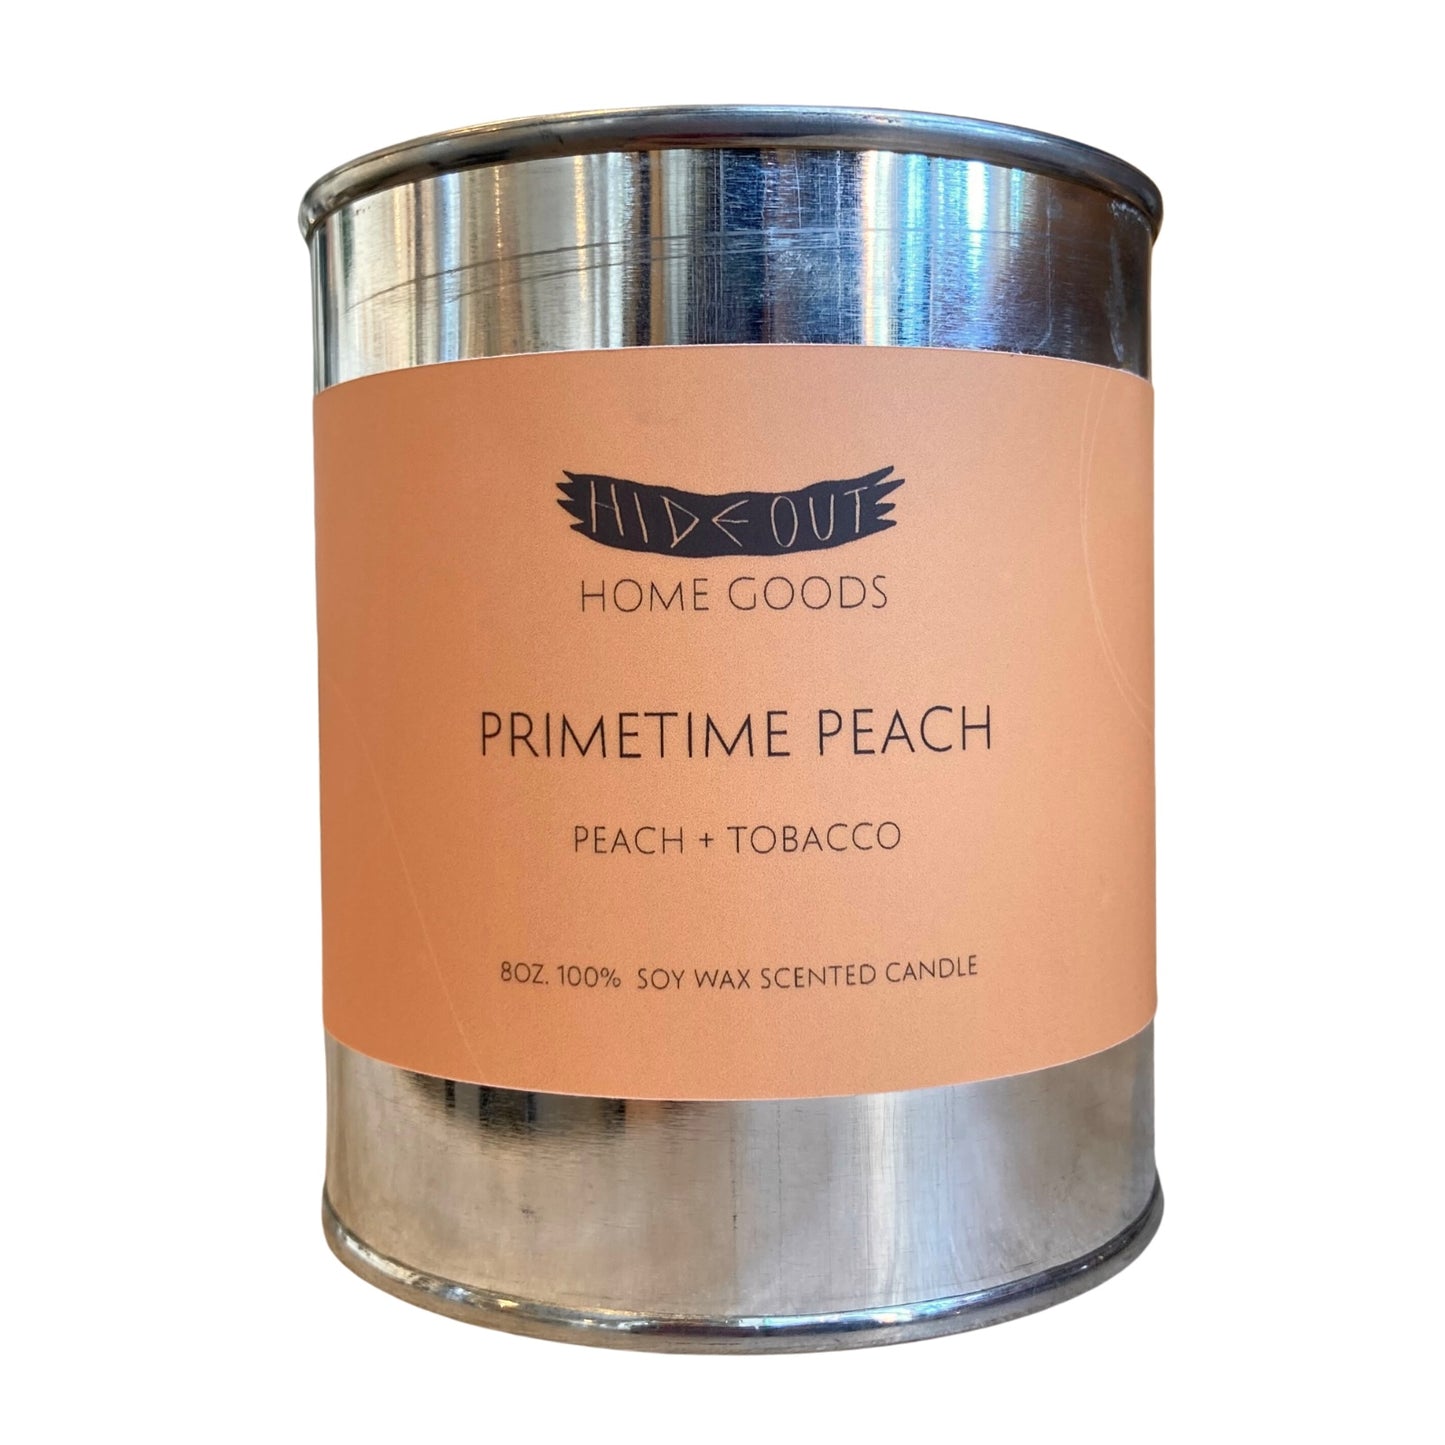 Hideout Scented Soy Candle | Primetime Peach | Peach + Tobacco